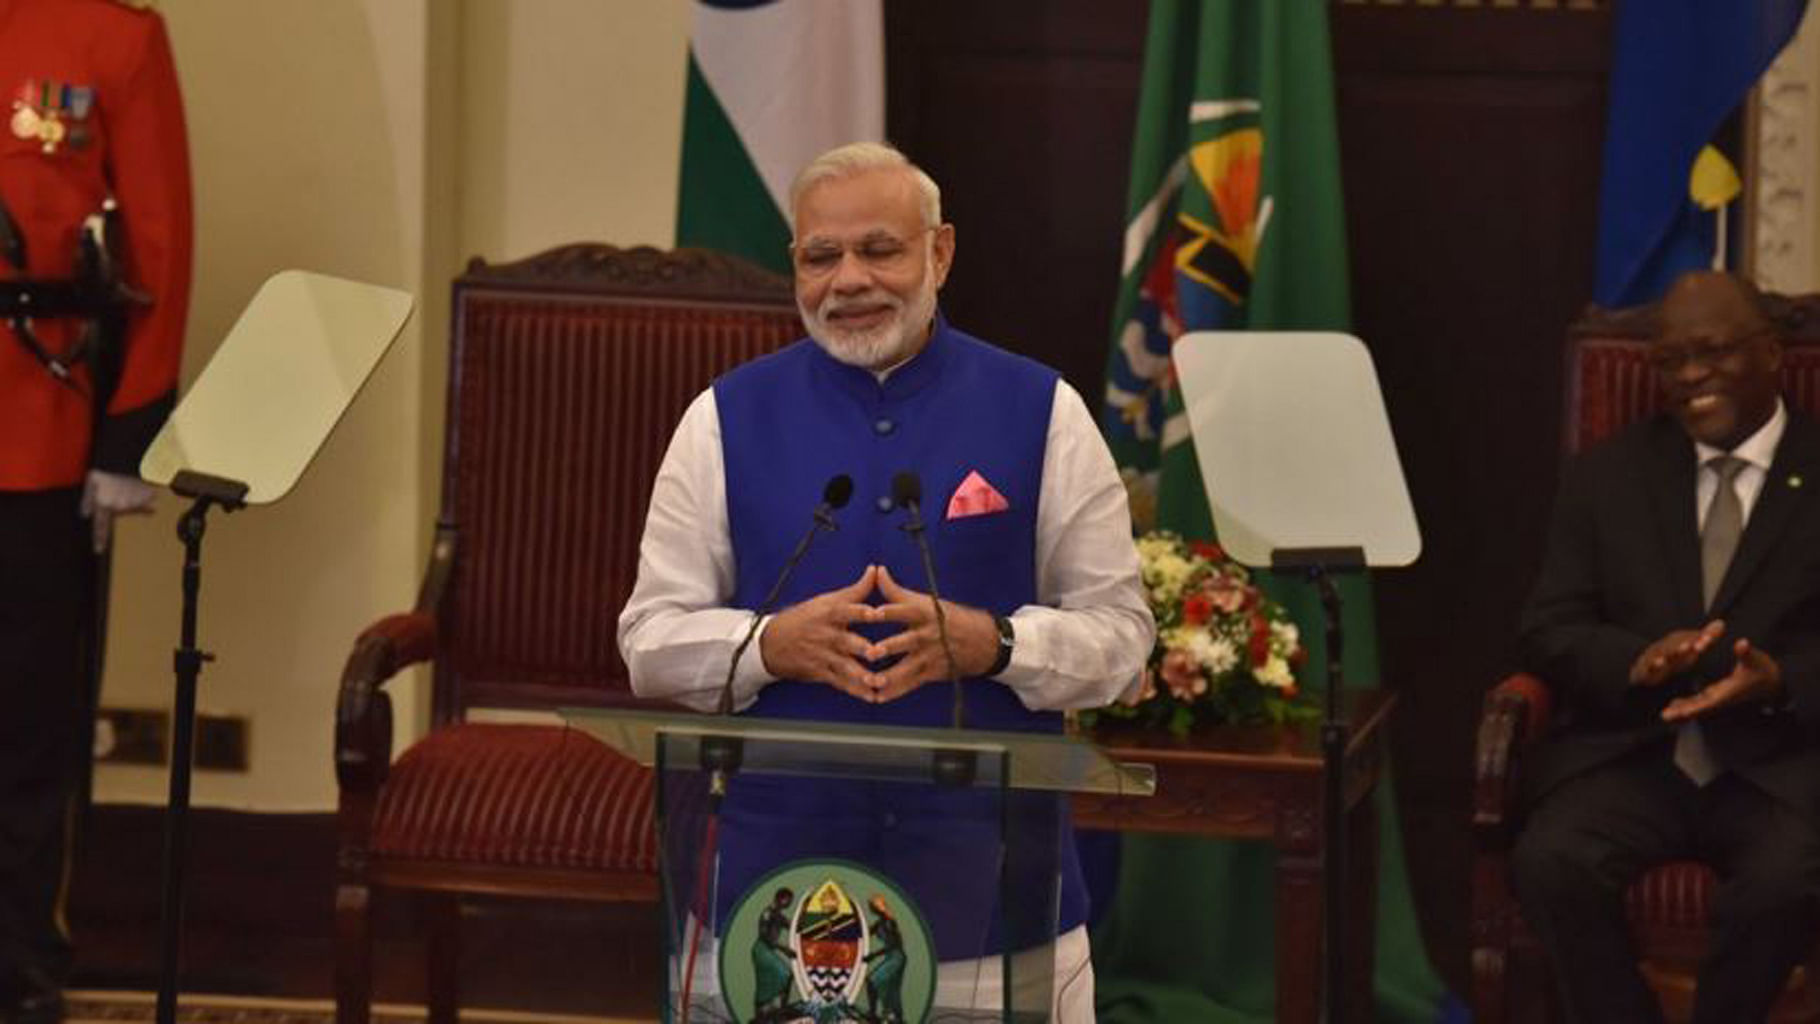 PM Modi addresses the press during his  visit to Tanzania. (Photo Courtesy: Twitter/<a href="https://twitter.com/IndianDiplomacy/status/752066136532017152">@IndianDiplomacy</a>)